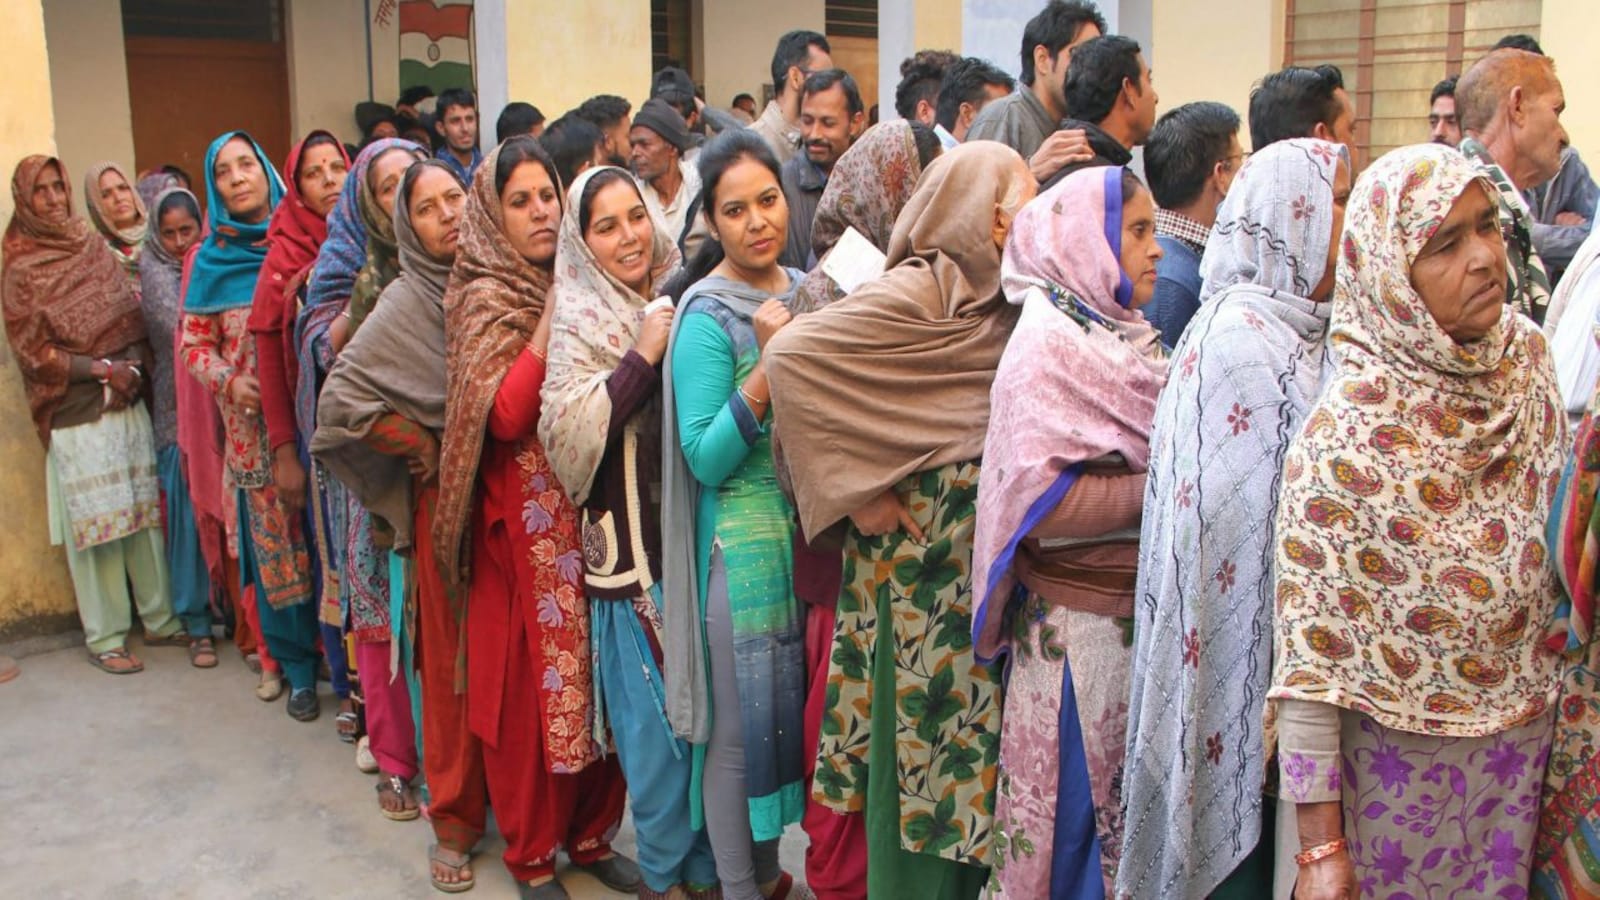 The Forty-one Polling So Far in Panchayat Polls in 4 Districts of Haryana.